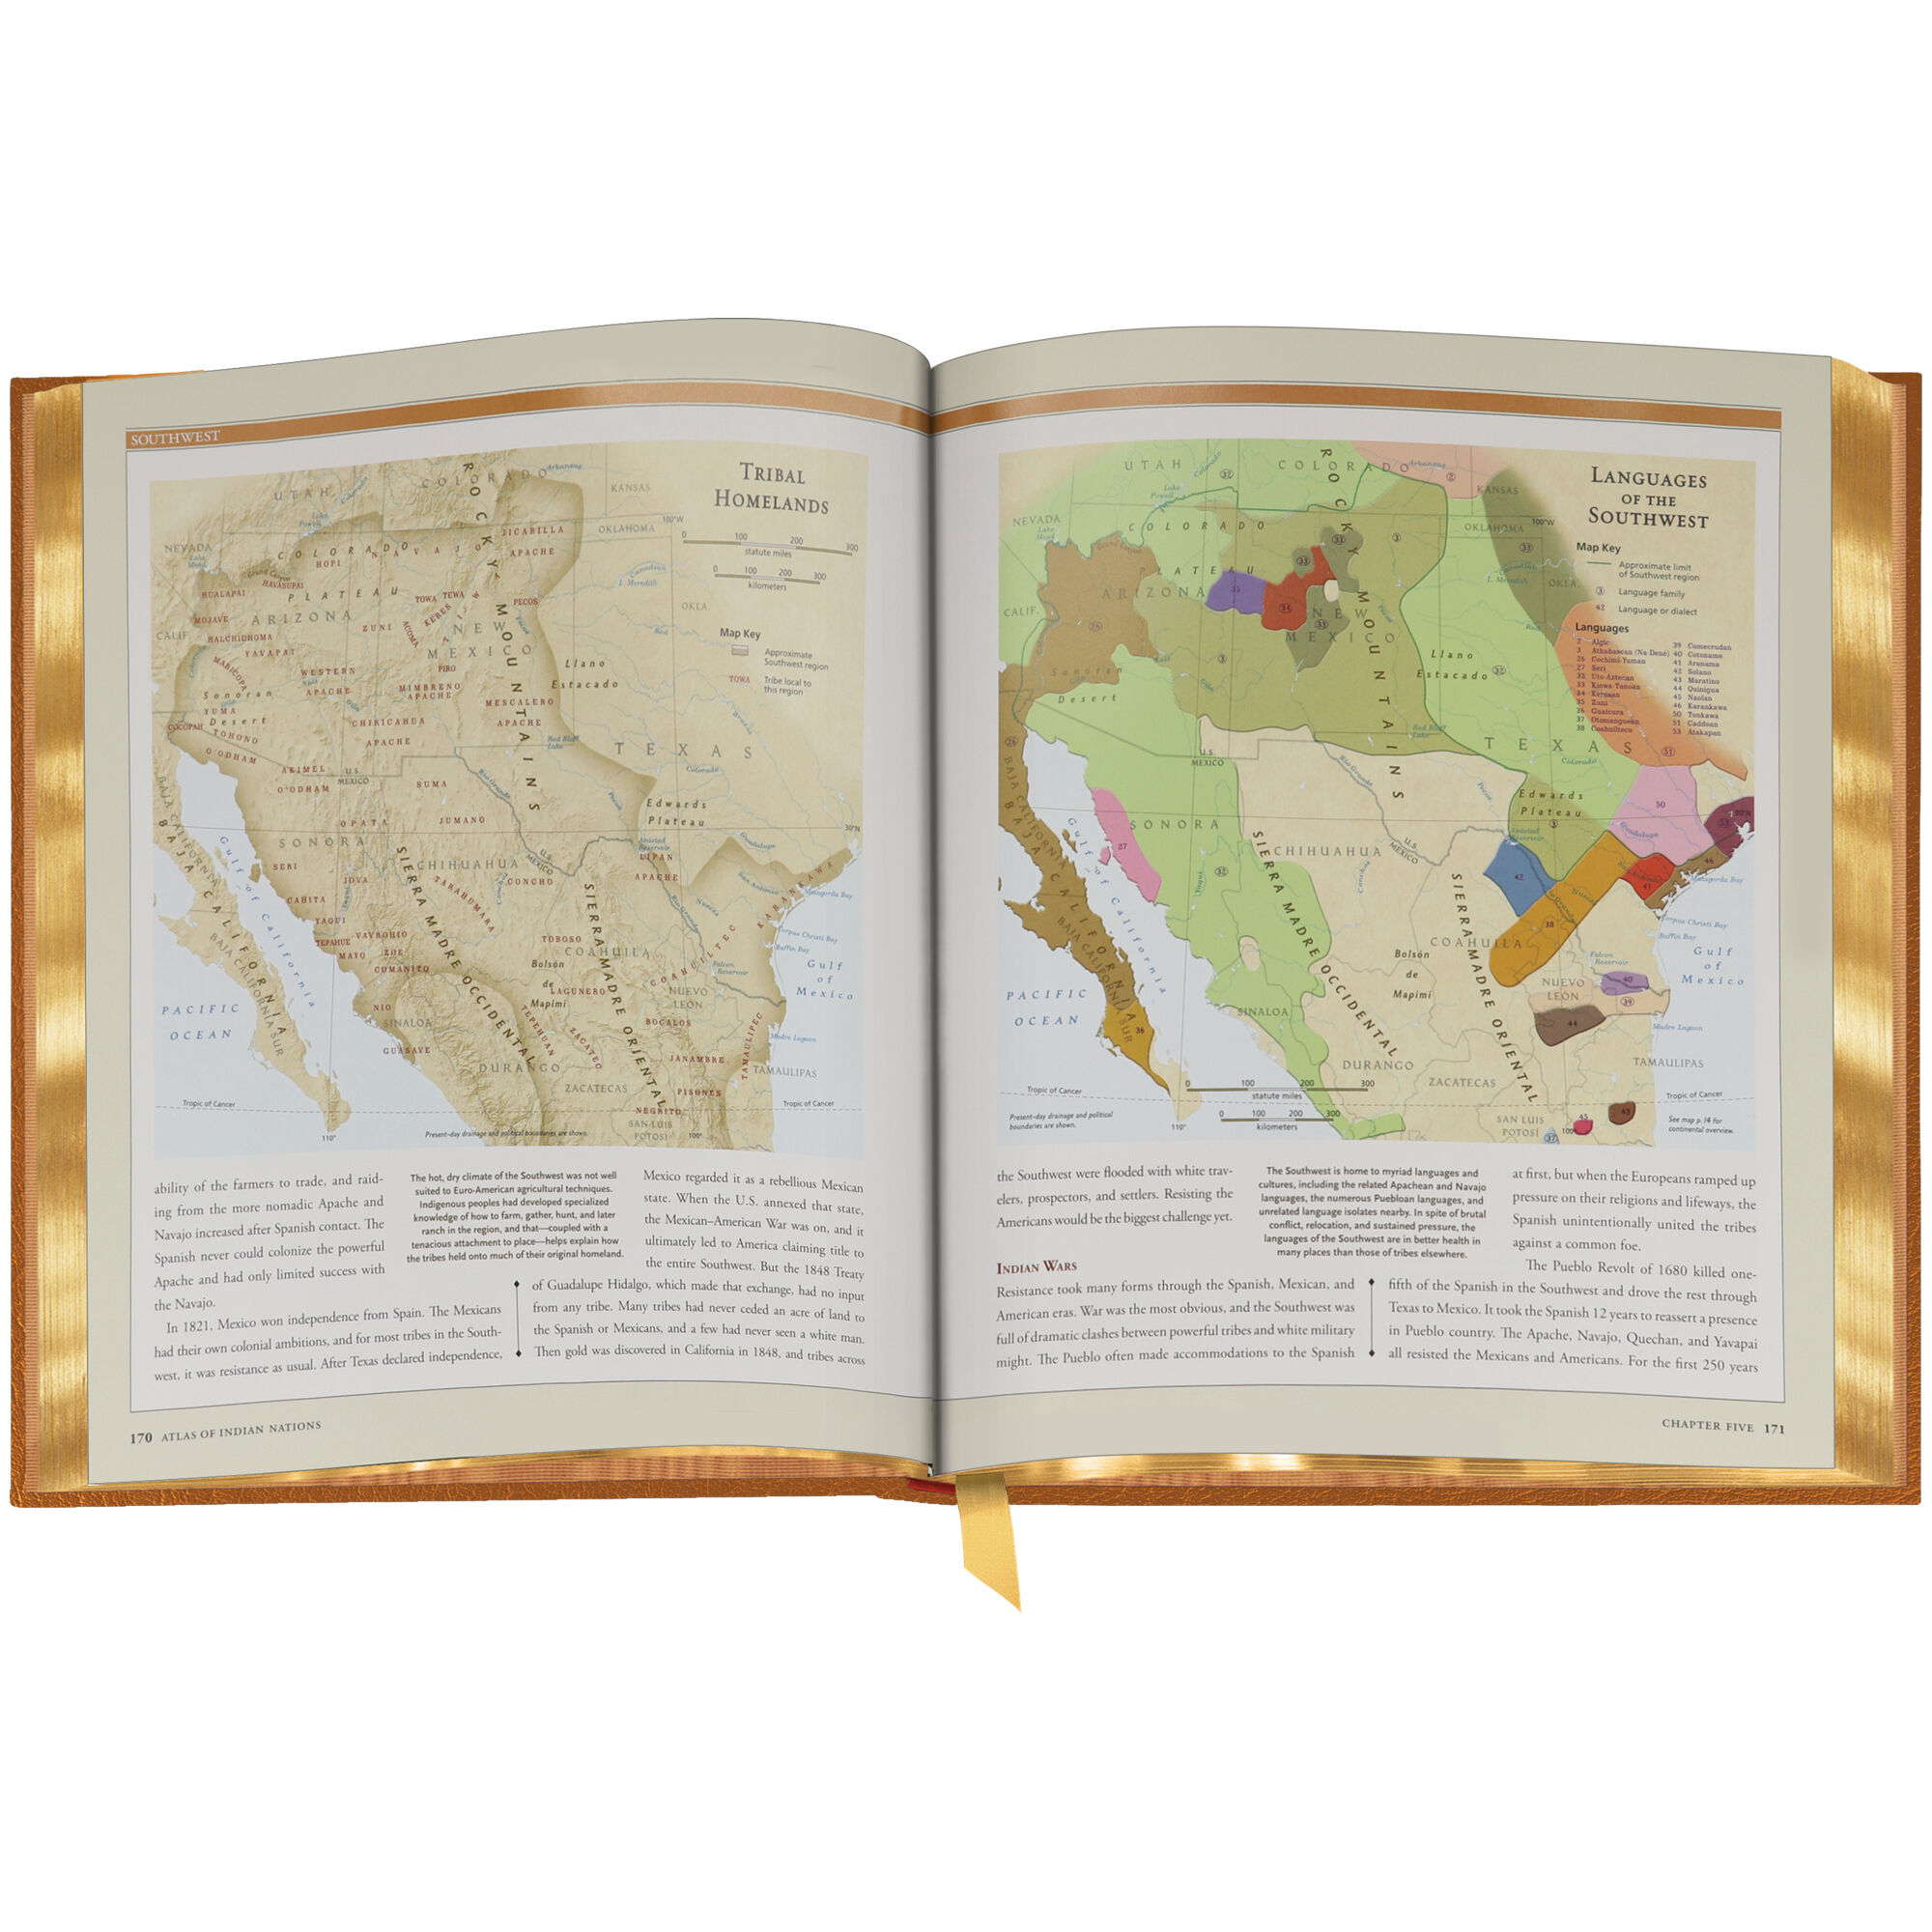 Atlas of Indian Nations 3696 f sp5